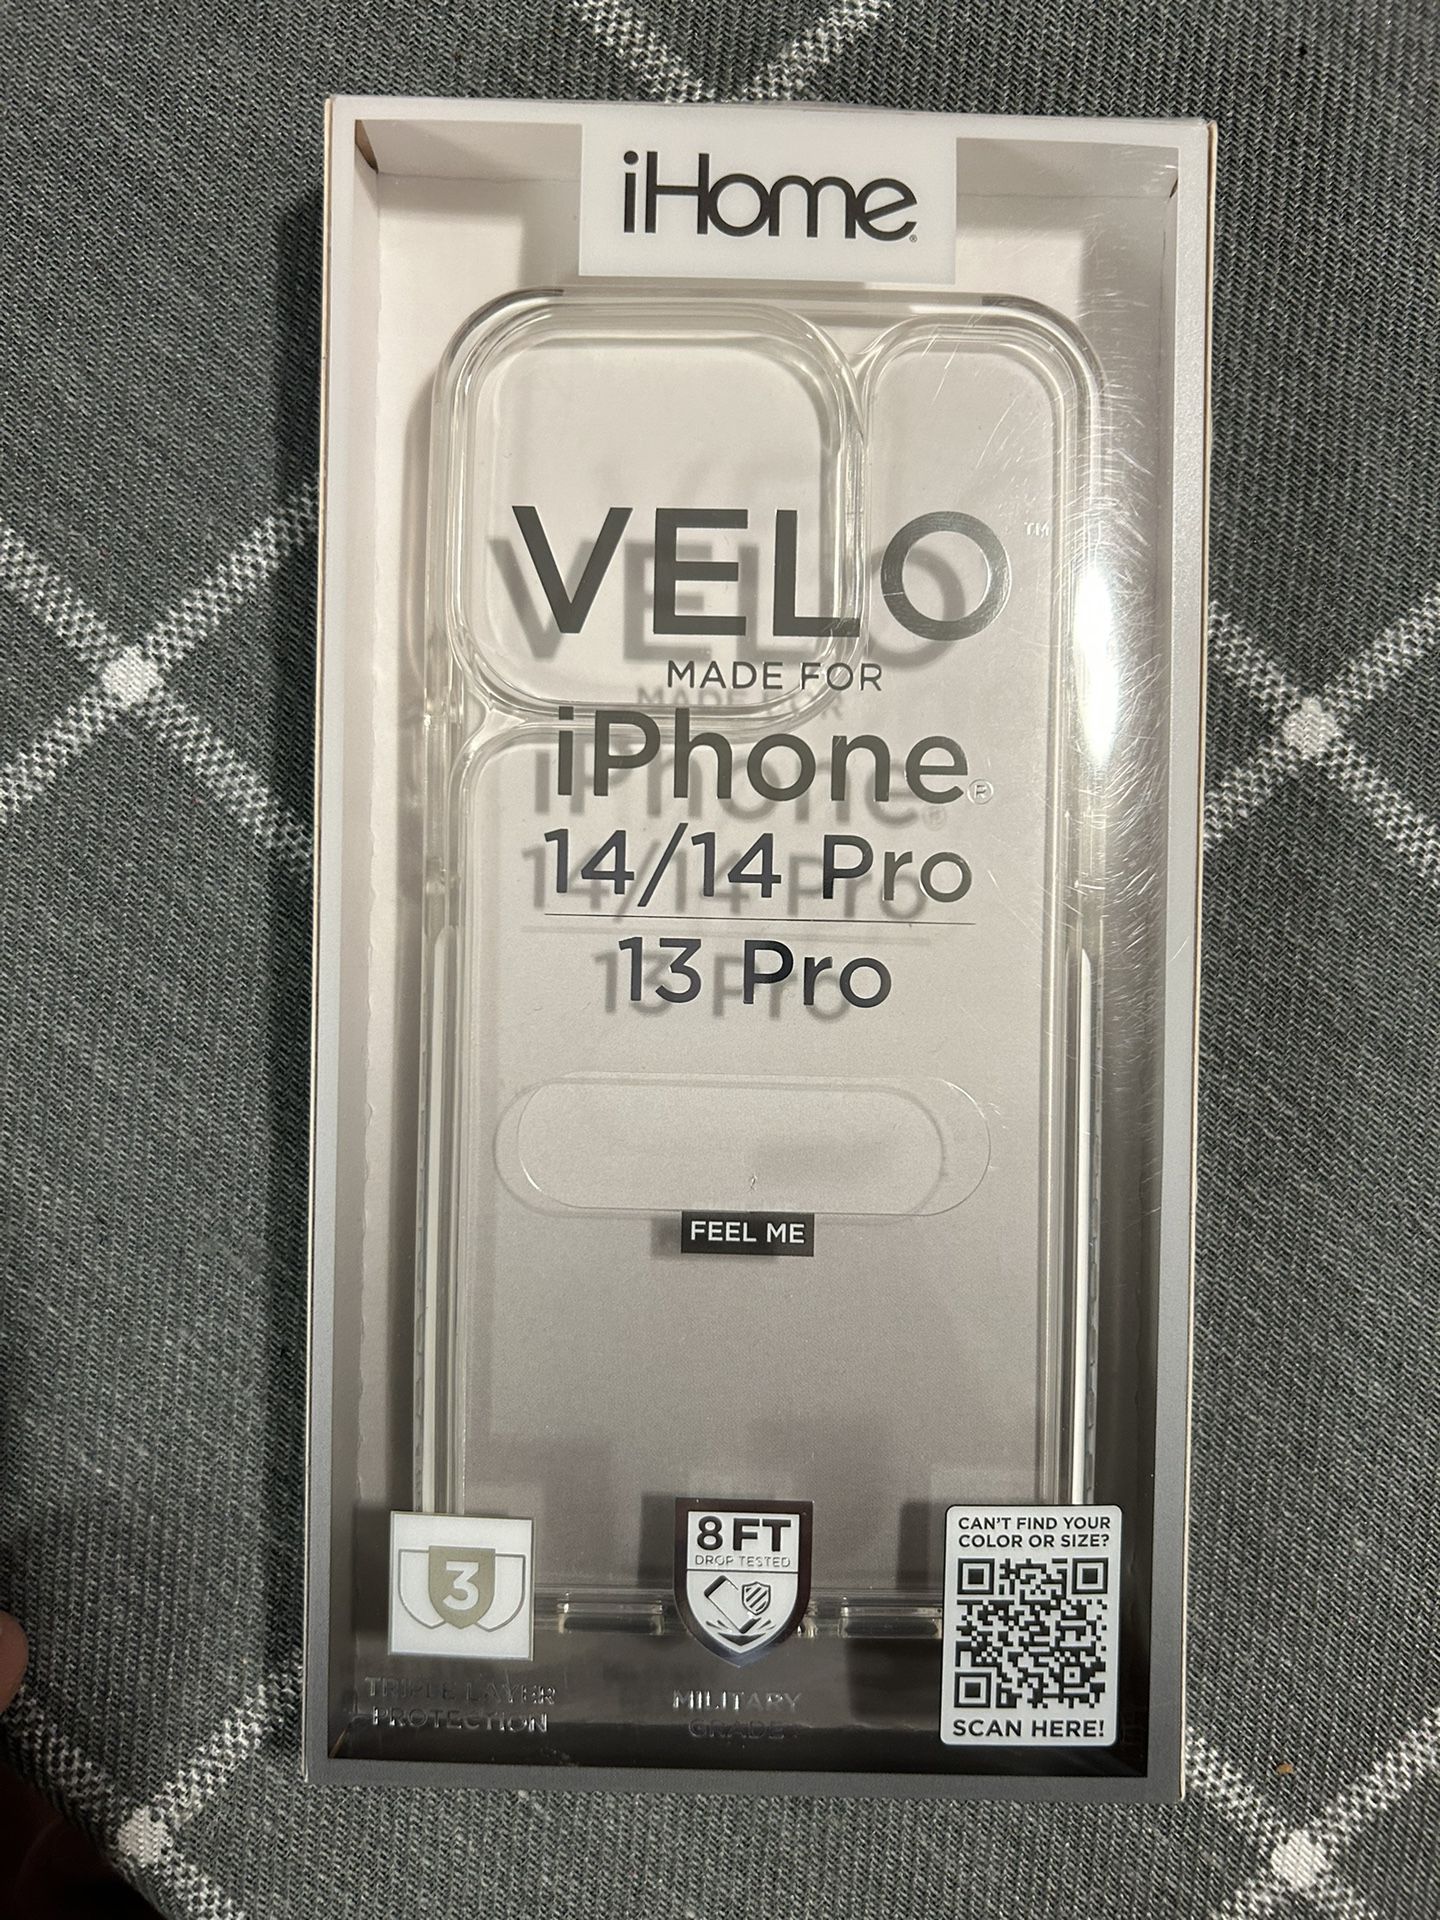 iHome Velo Made For iPhone 14/14 Pro Clear Case